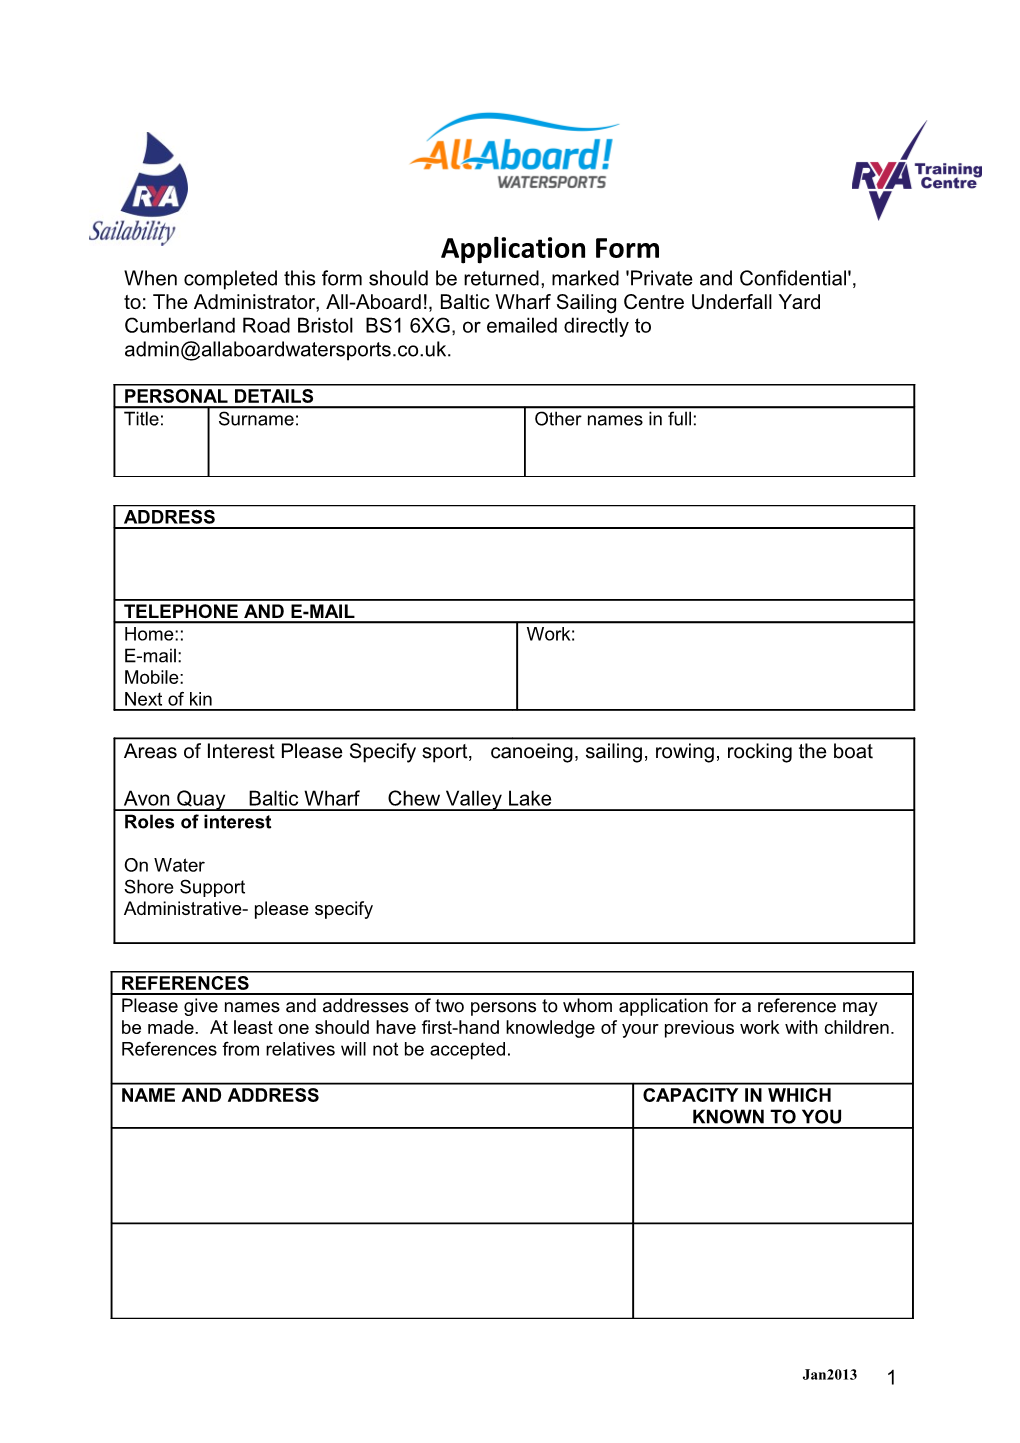 Application Form s25